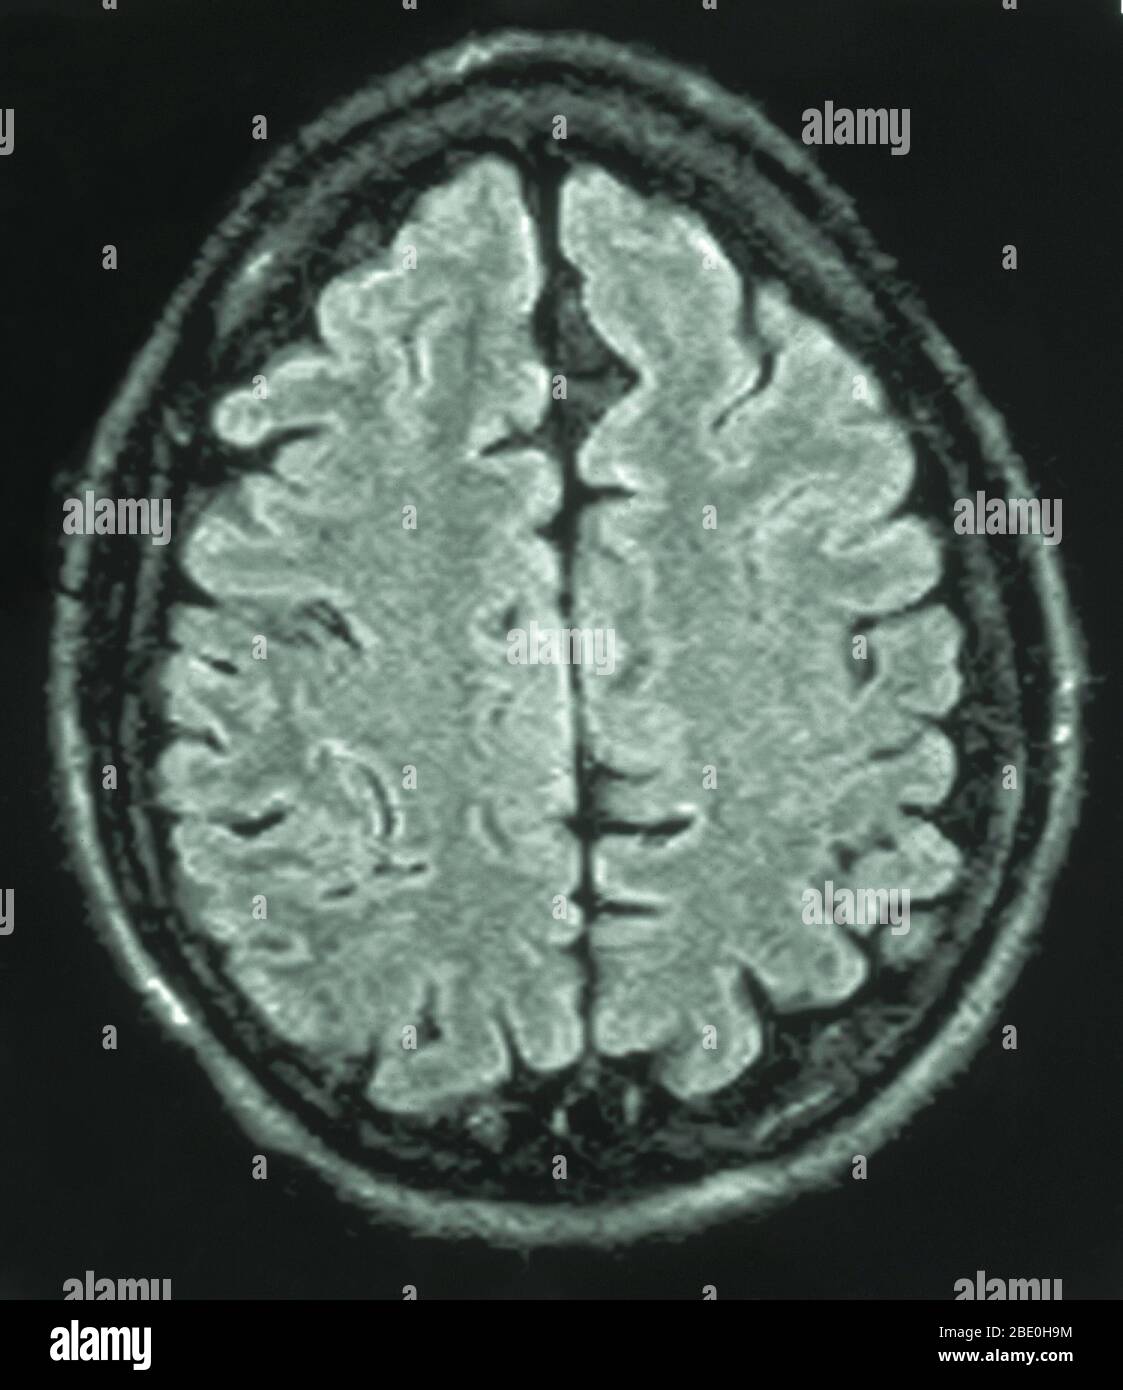 MRI of the brain (axial view) of a 26 year old male. The MRI was taken as a result of head injury in a car accident. Diagnosis from the MRI's is a small arachnoid cyst in the parasagittal anterior left frontal region. All other aspects appear normal. Stock Photo